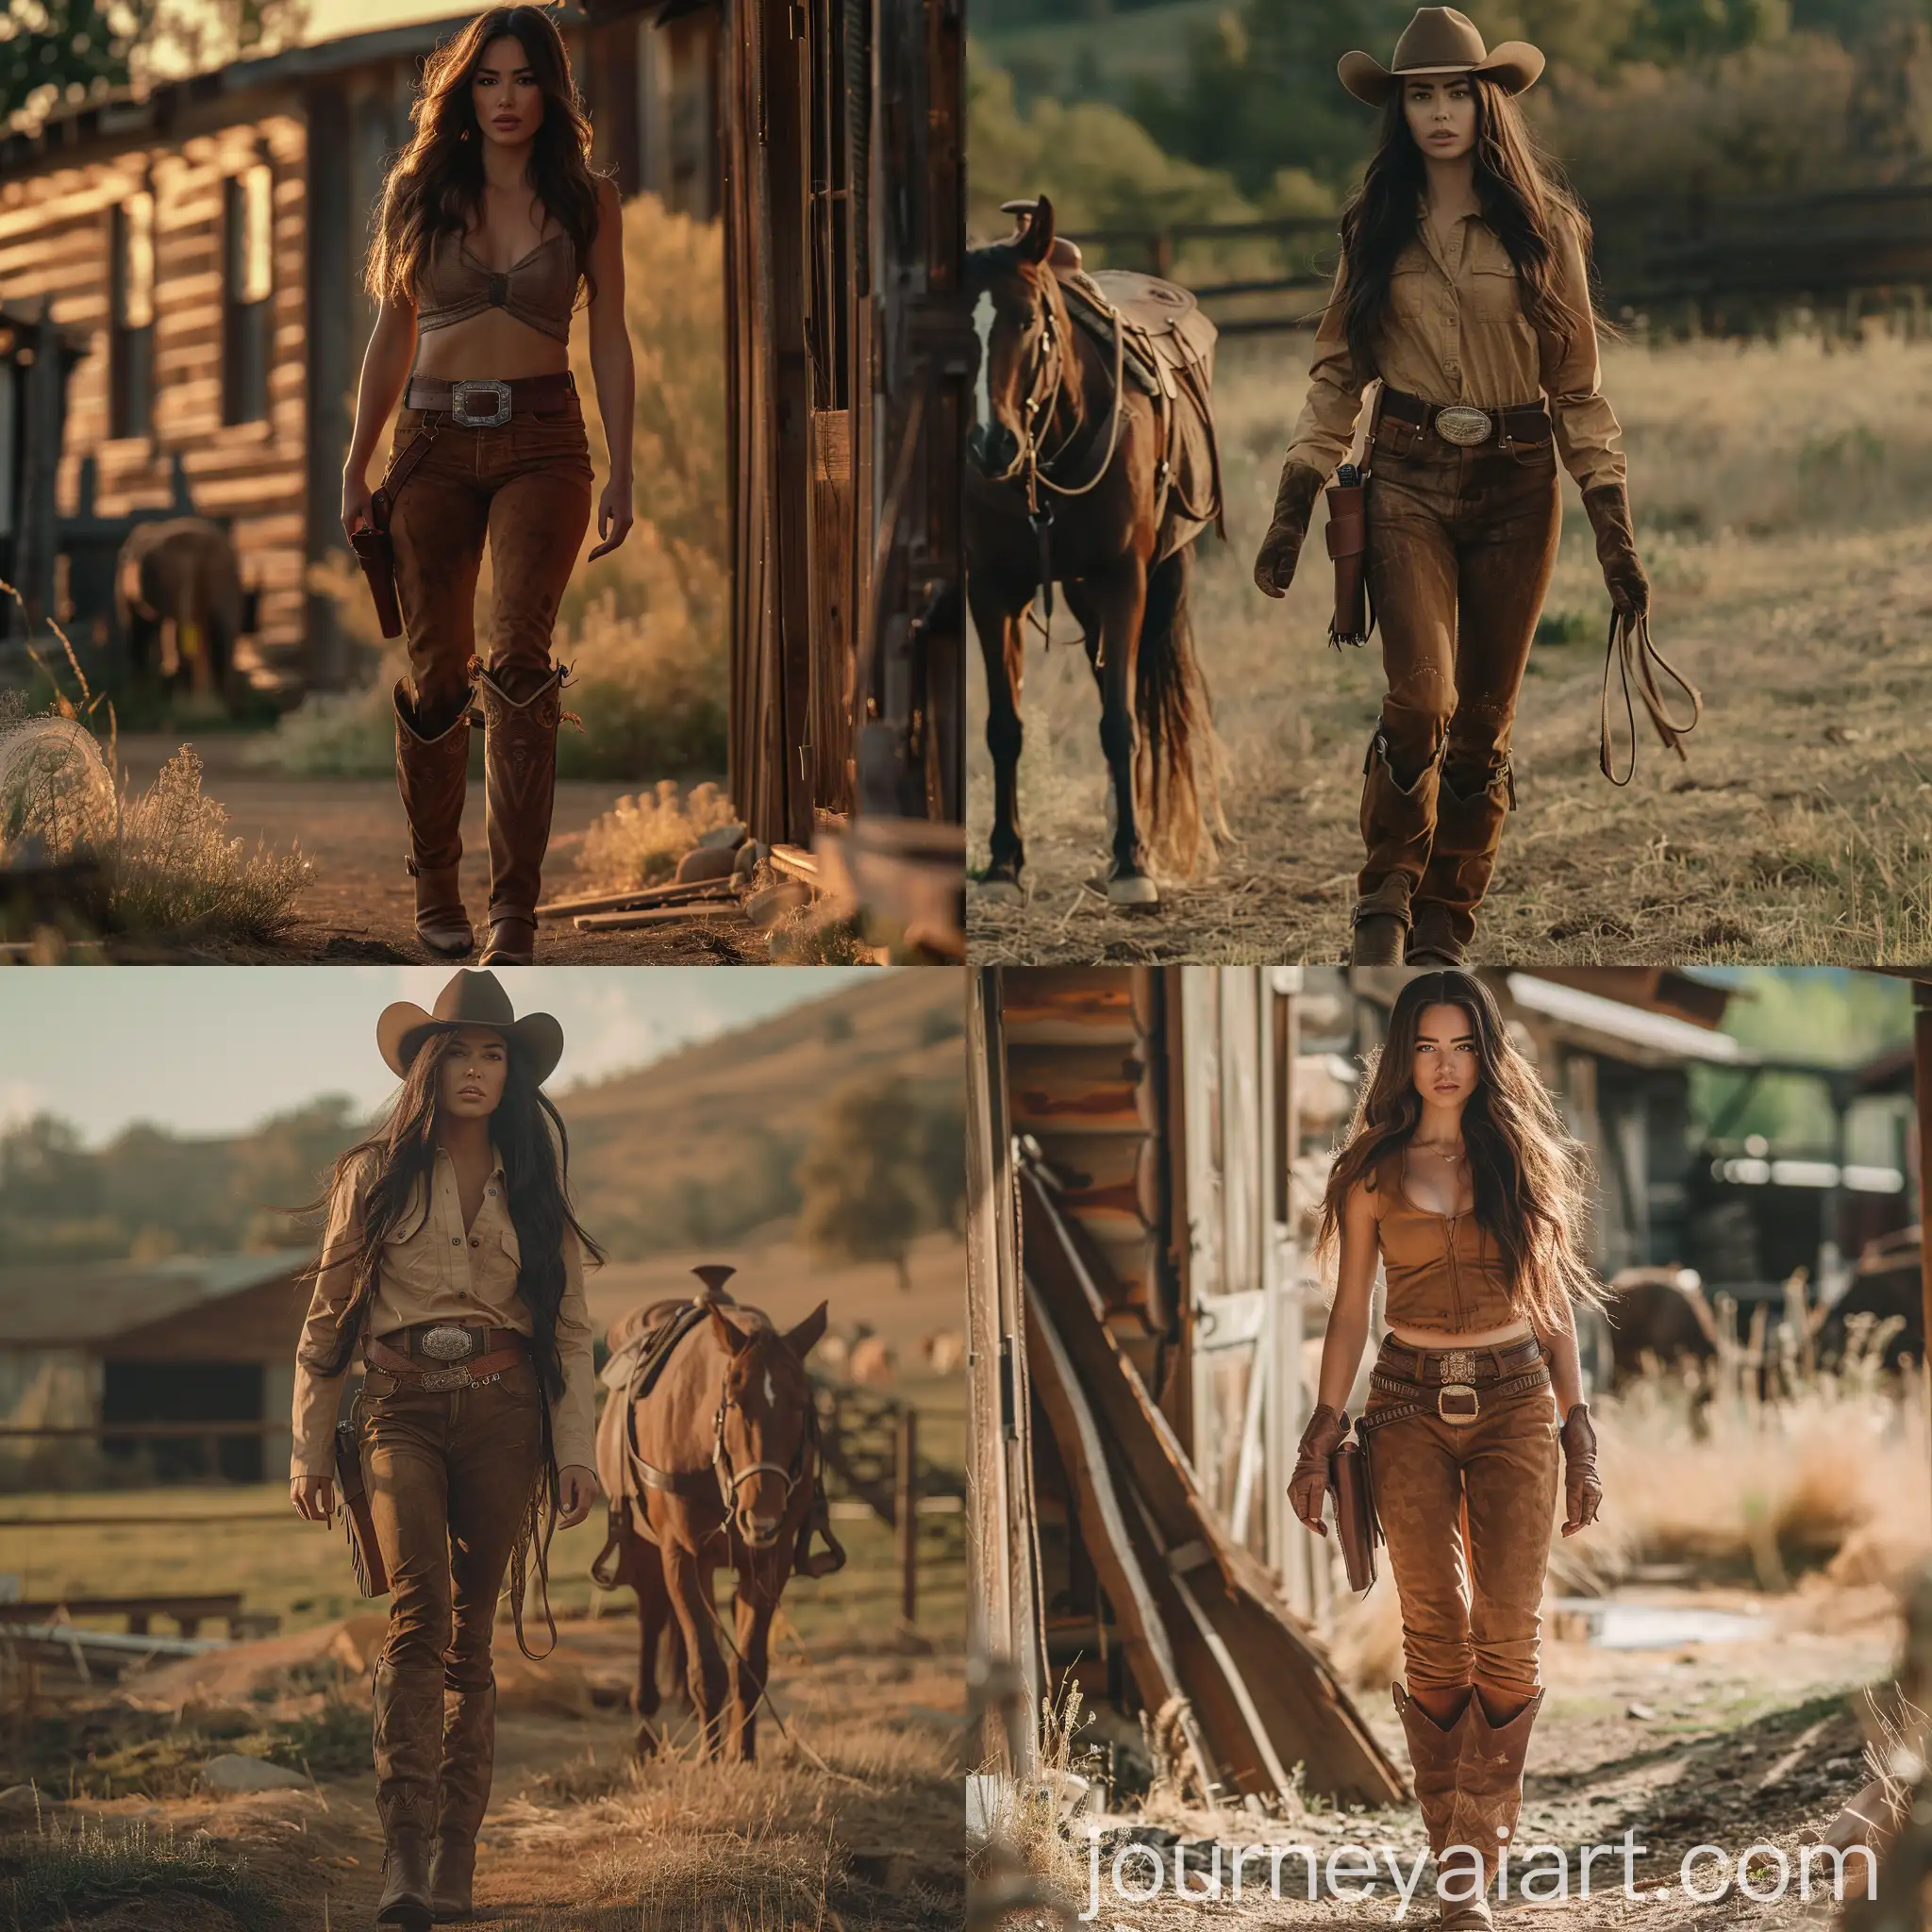 Megan-Fox-Walking-in-a-Ranch-in-Brown-Cowgirl-Chaps-and-Boots